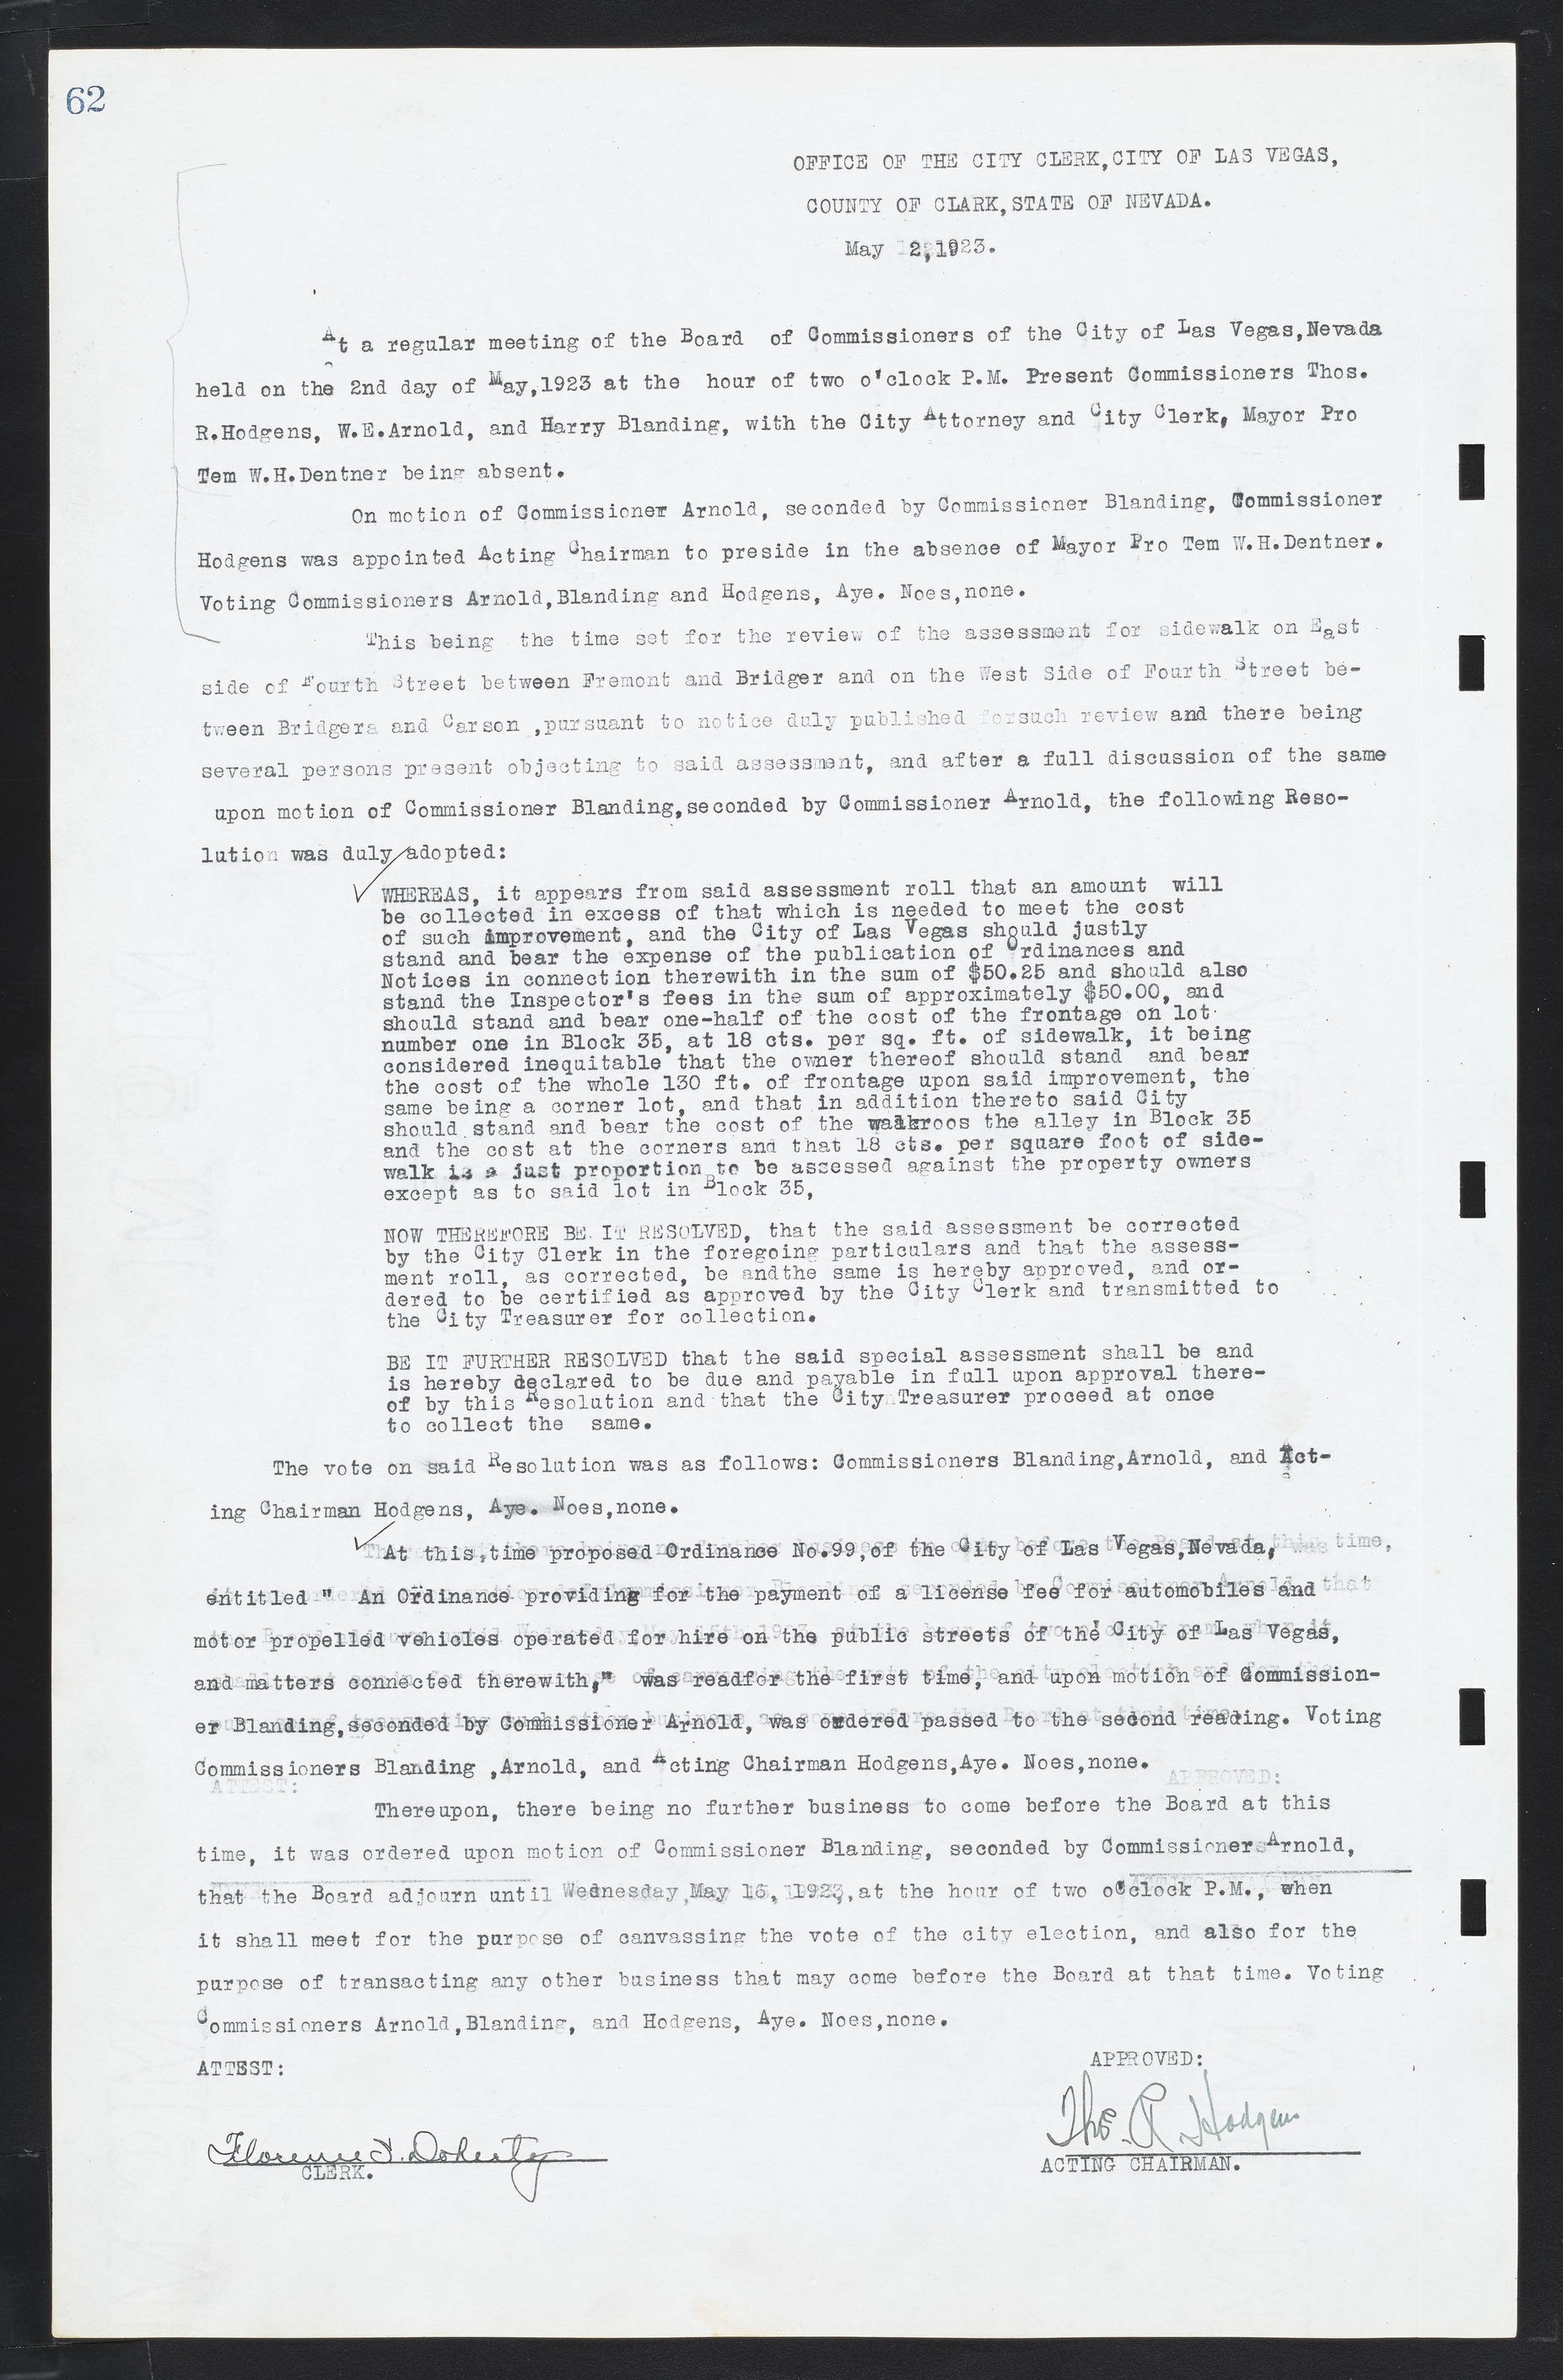 Las Vegas City Commission Minutes, March 1, 1922 to May 10, 1929, lvc000002-69